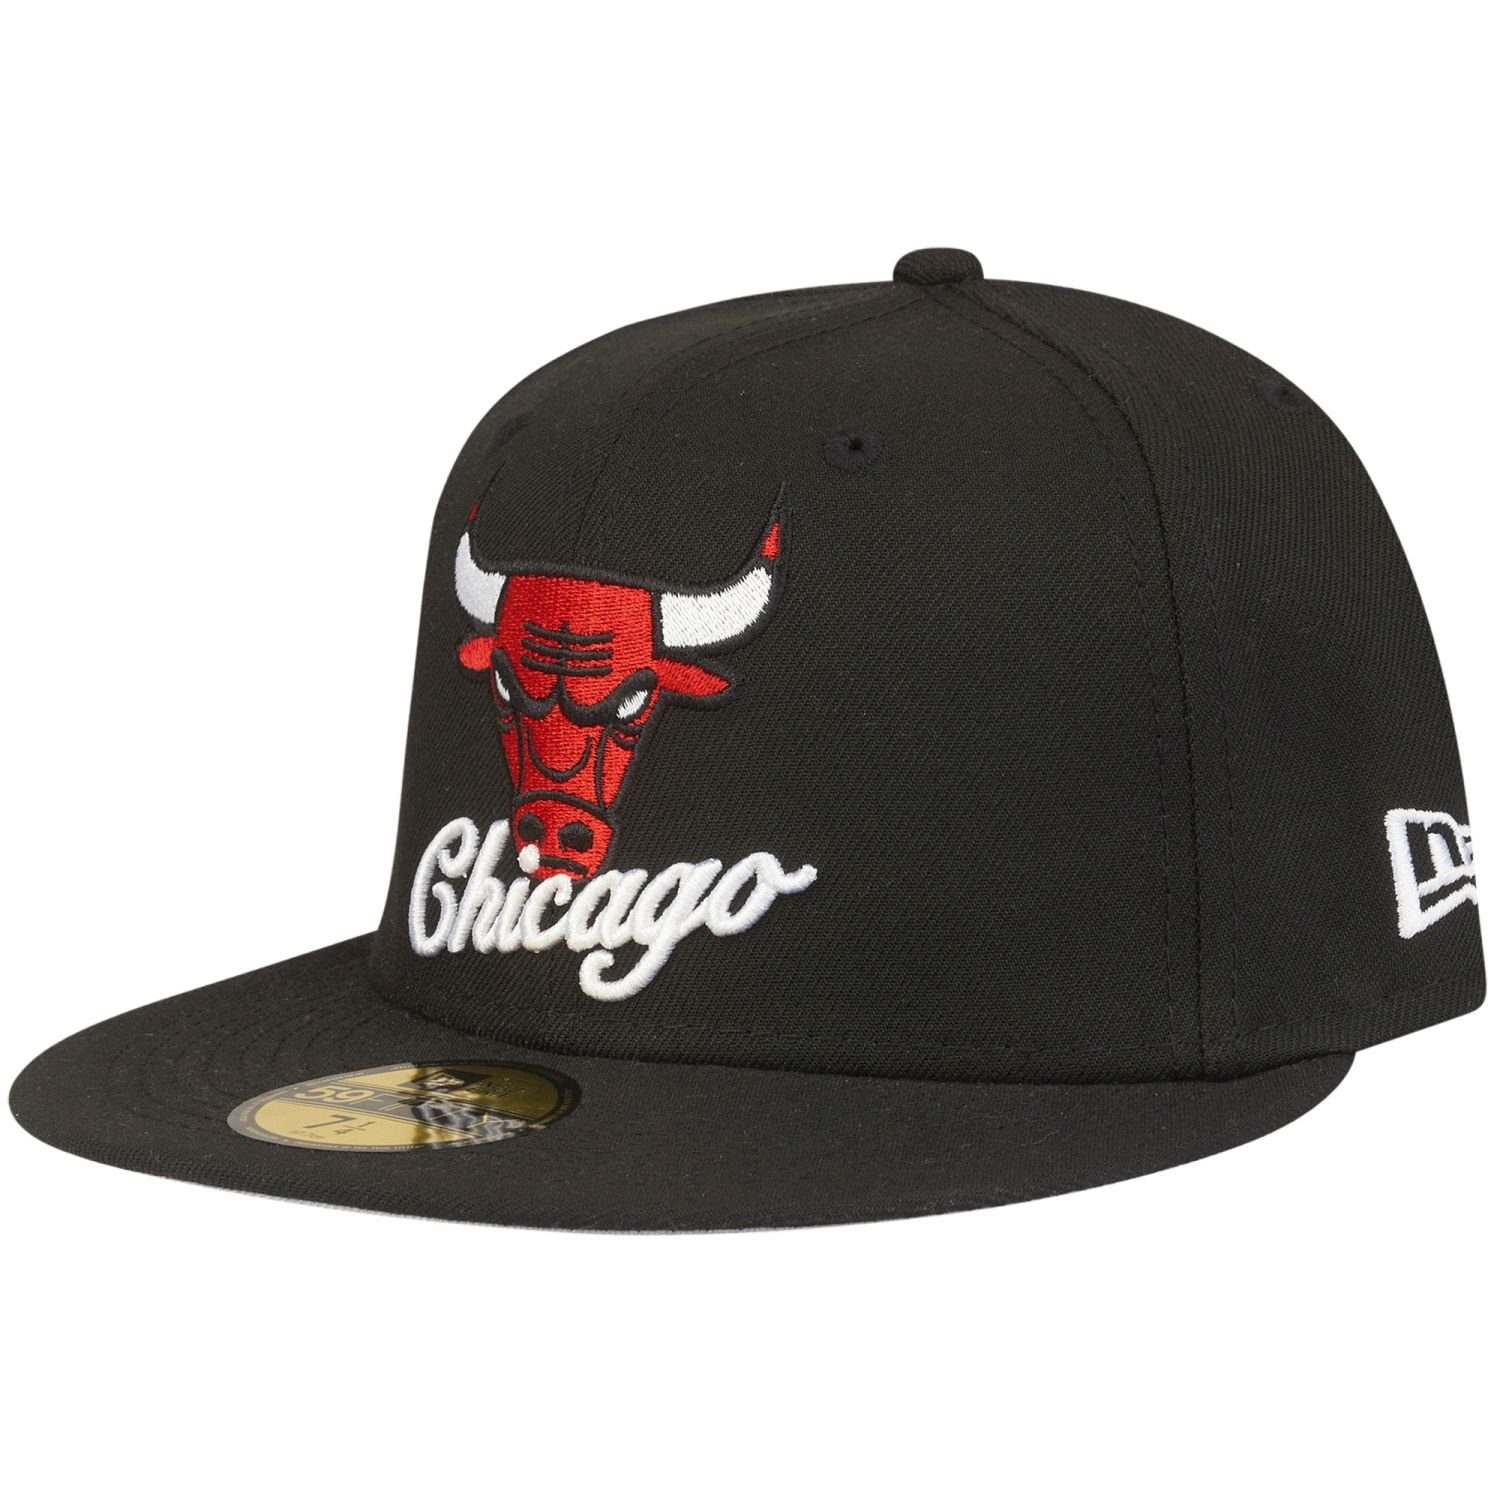 New Era Fitted Cap 59Fifty DUAL LOGO Chicago Bulls